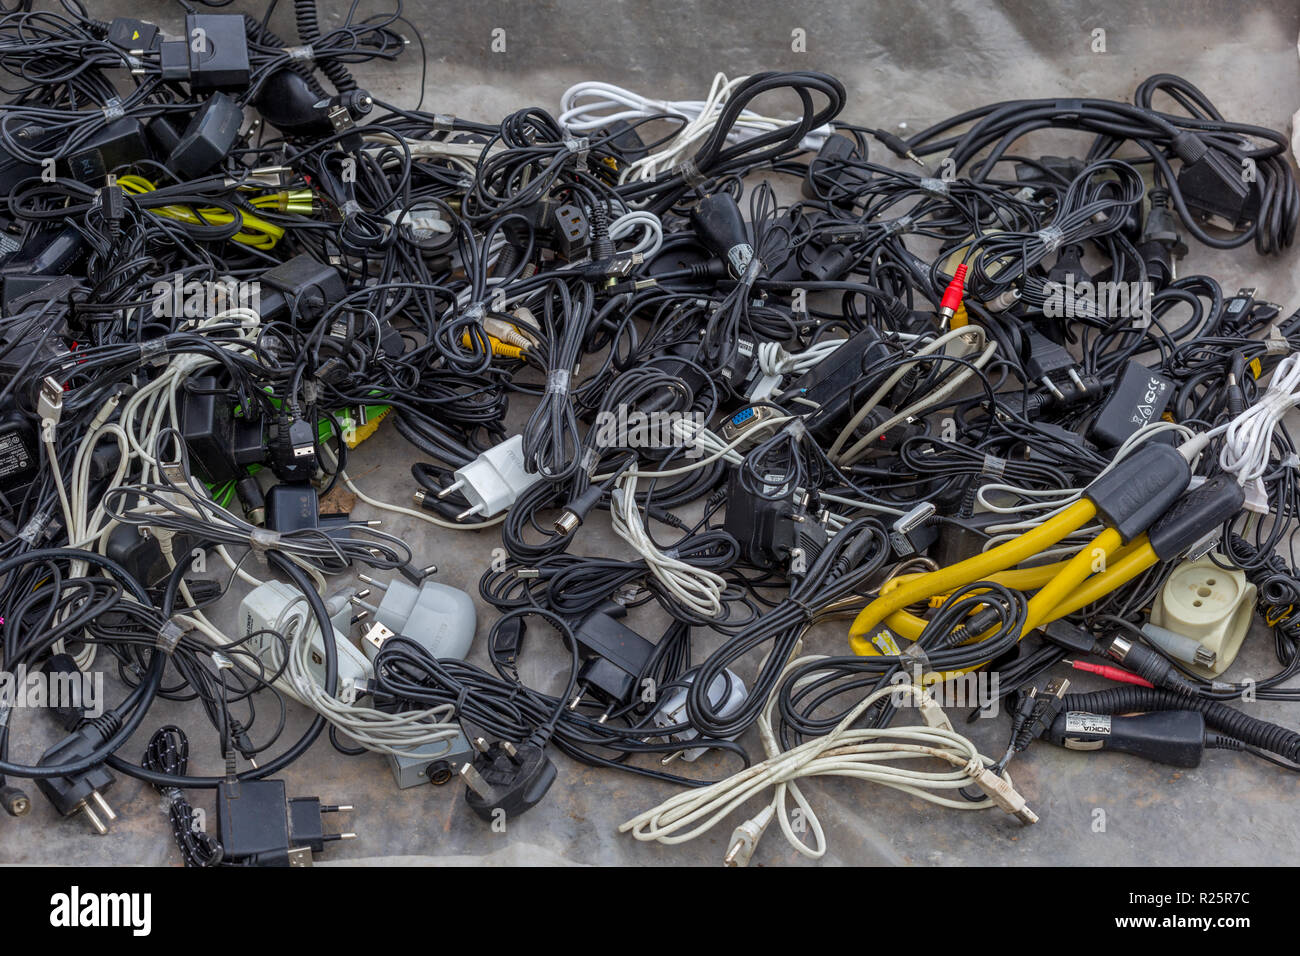 Old second electrics sell at flea market Stock Photo